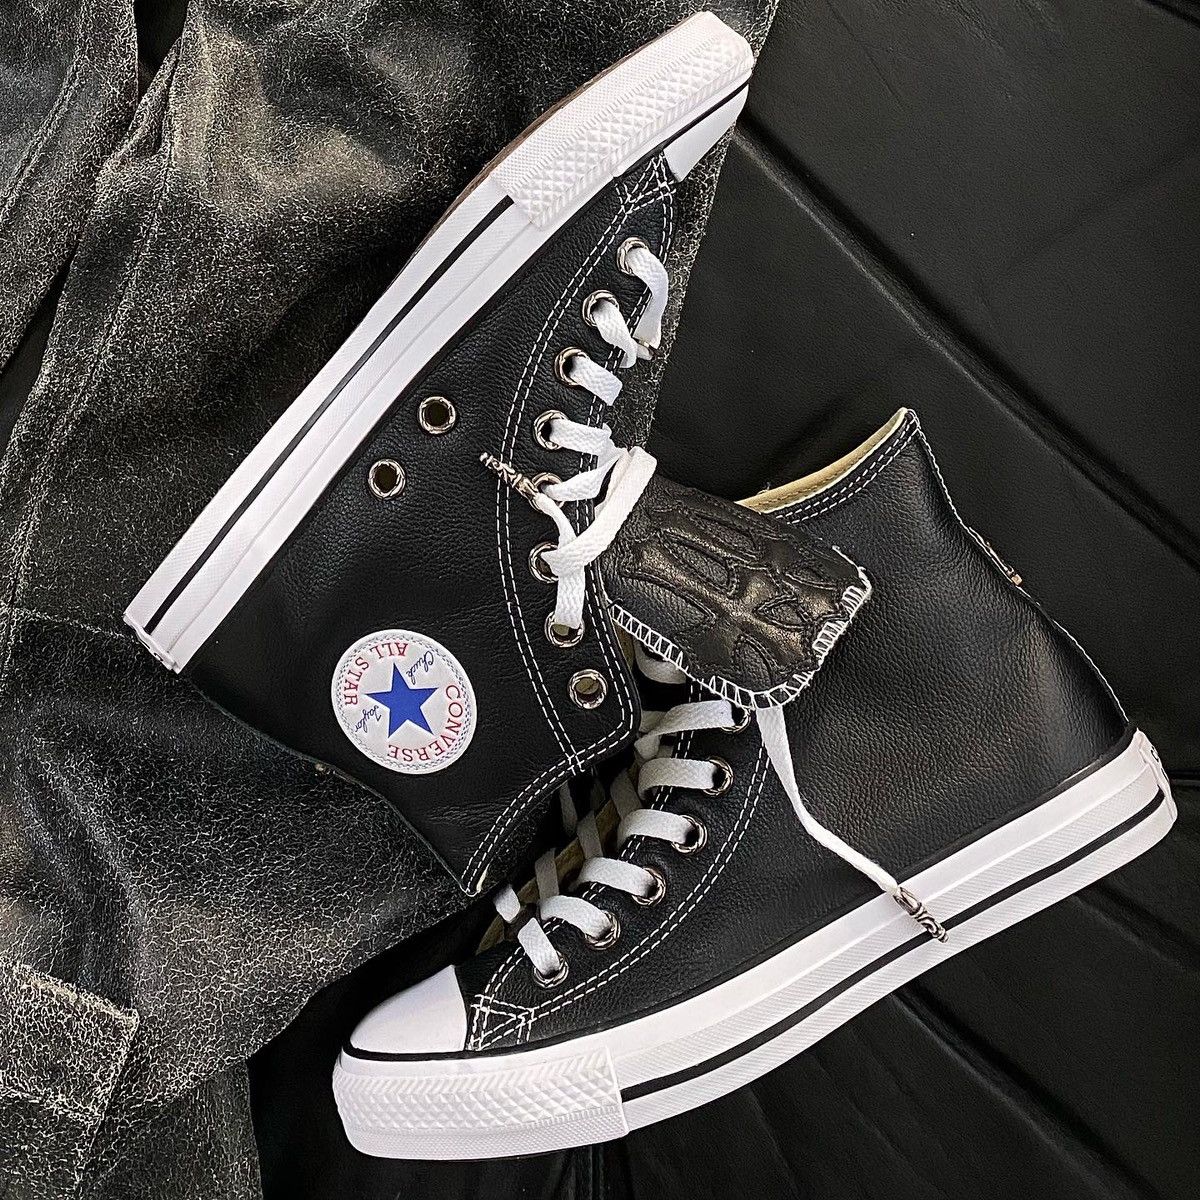 Pre-owned Chrome Hearts 3 Cross Leather Converse Chucks Shoes In Black